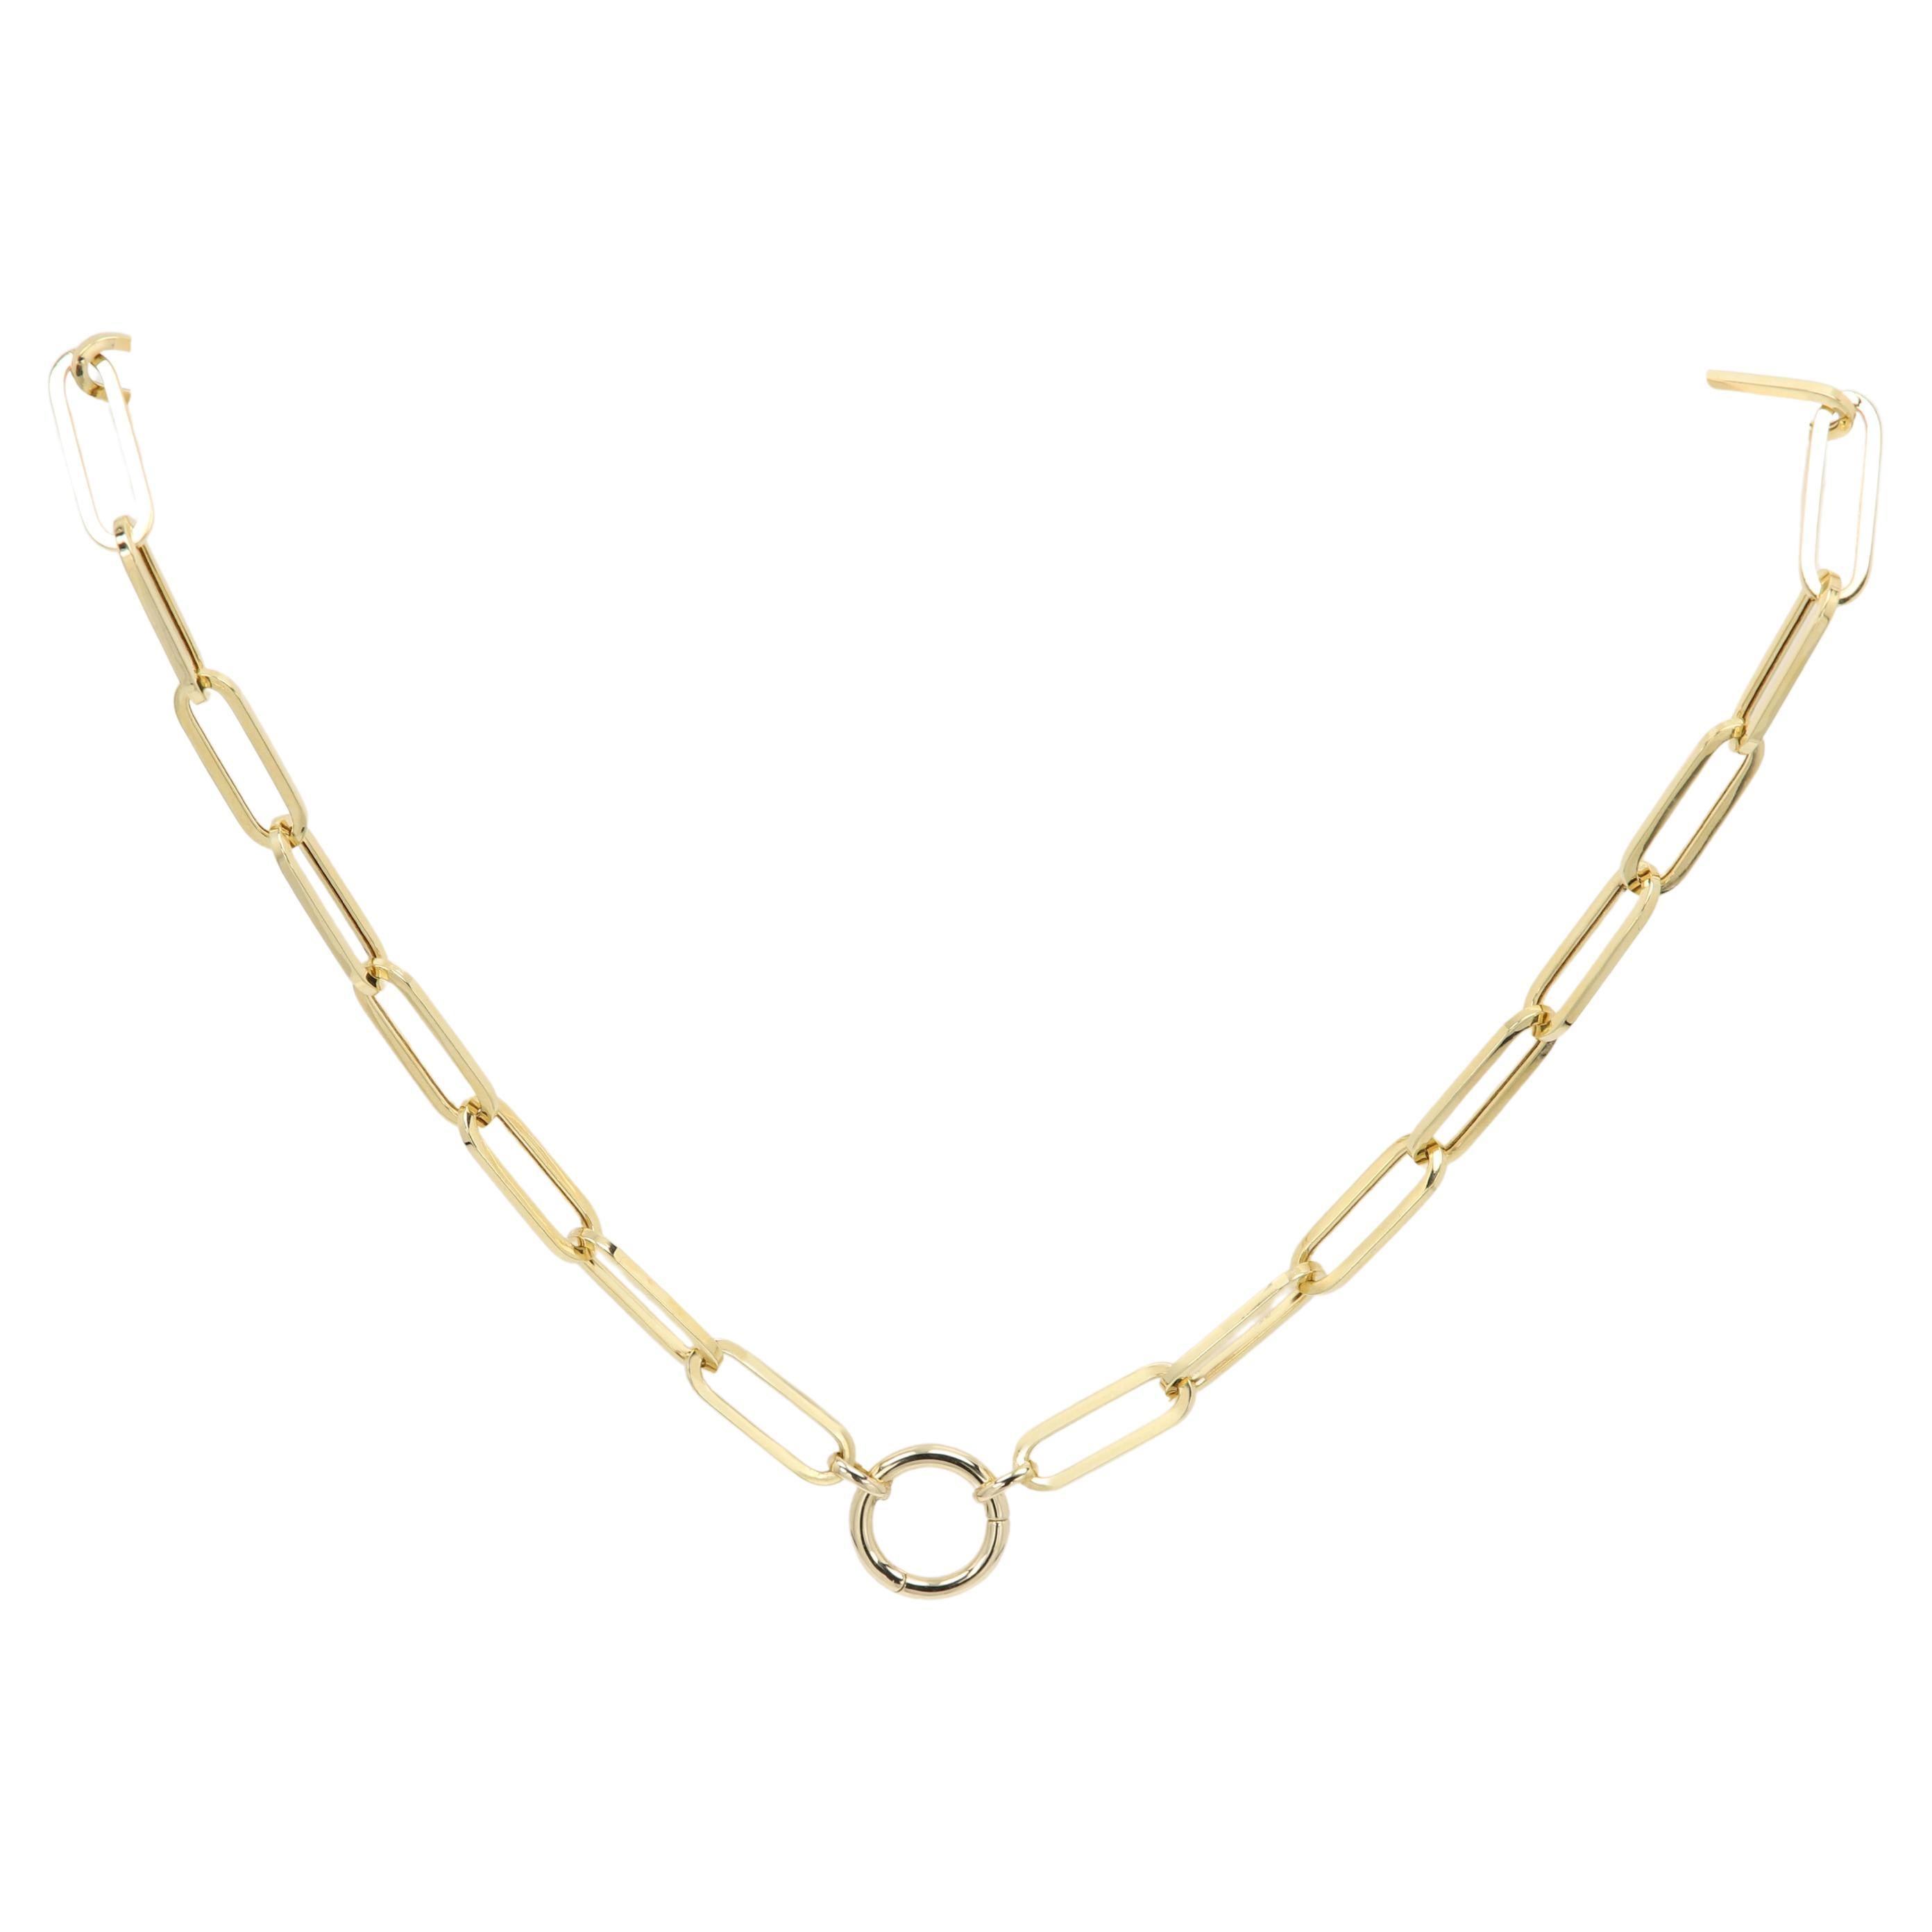 Enhancer Paperclip Necklace Chain 14 Karat Gold Italian Chain with Front Lock For Sale